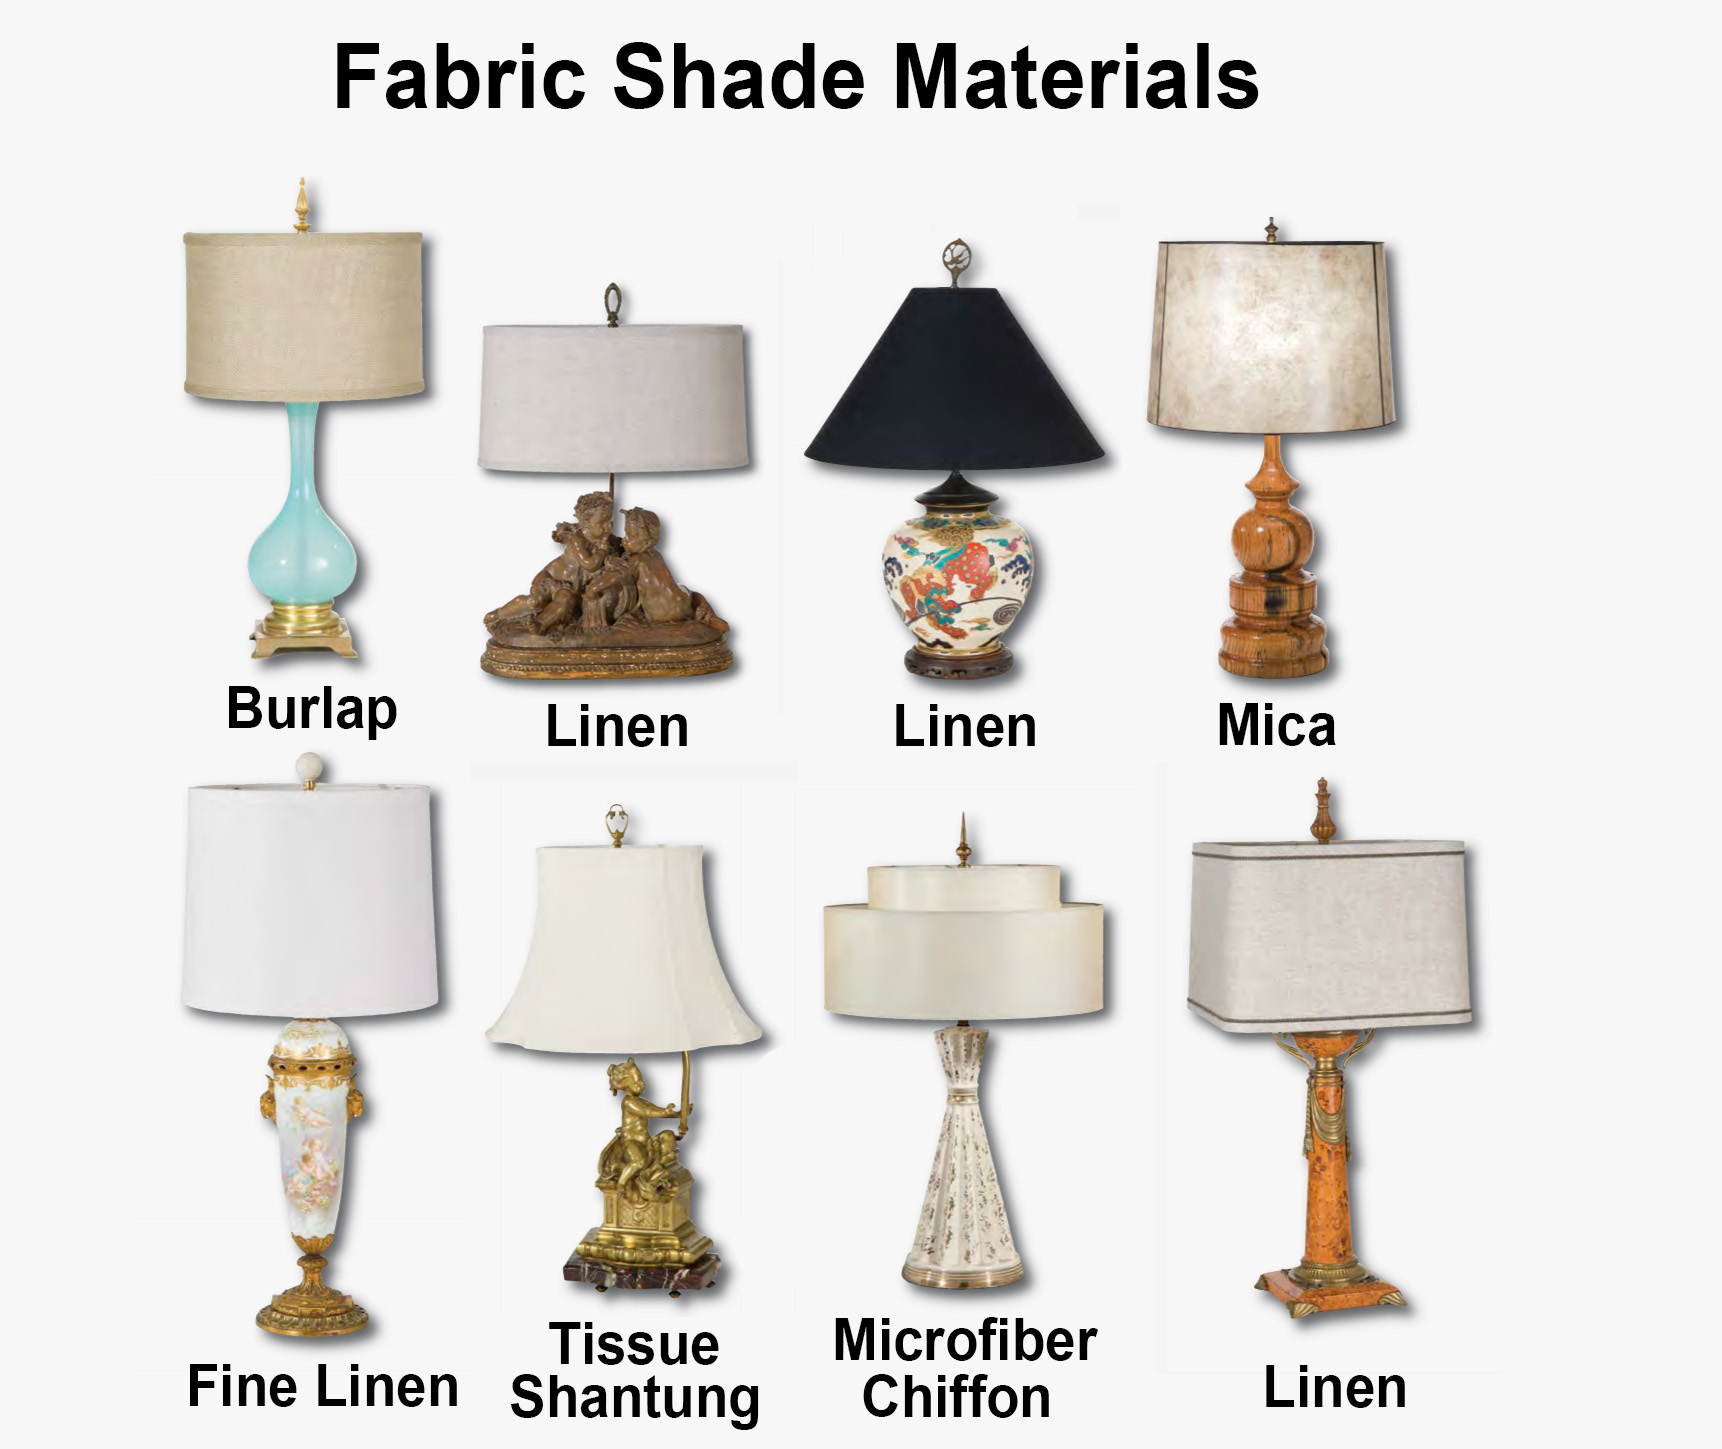 Fabric Shade, What Fabric Can I Use To Cover A Lampshade